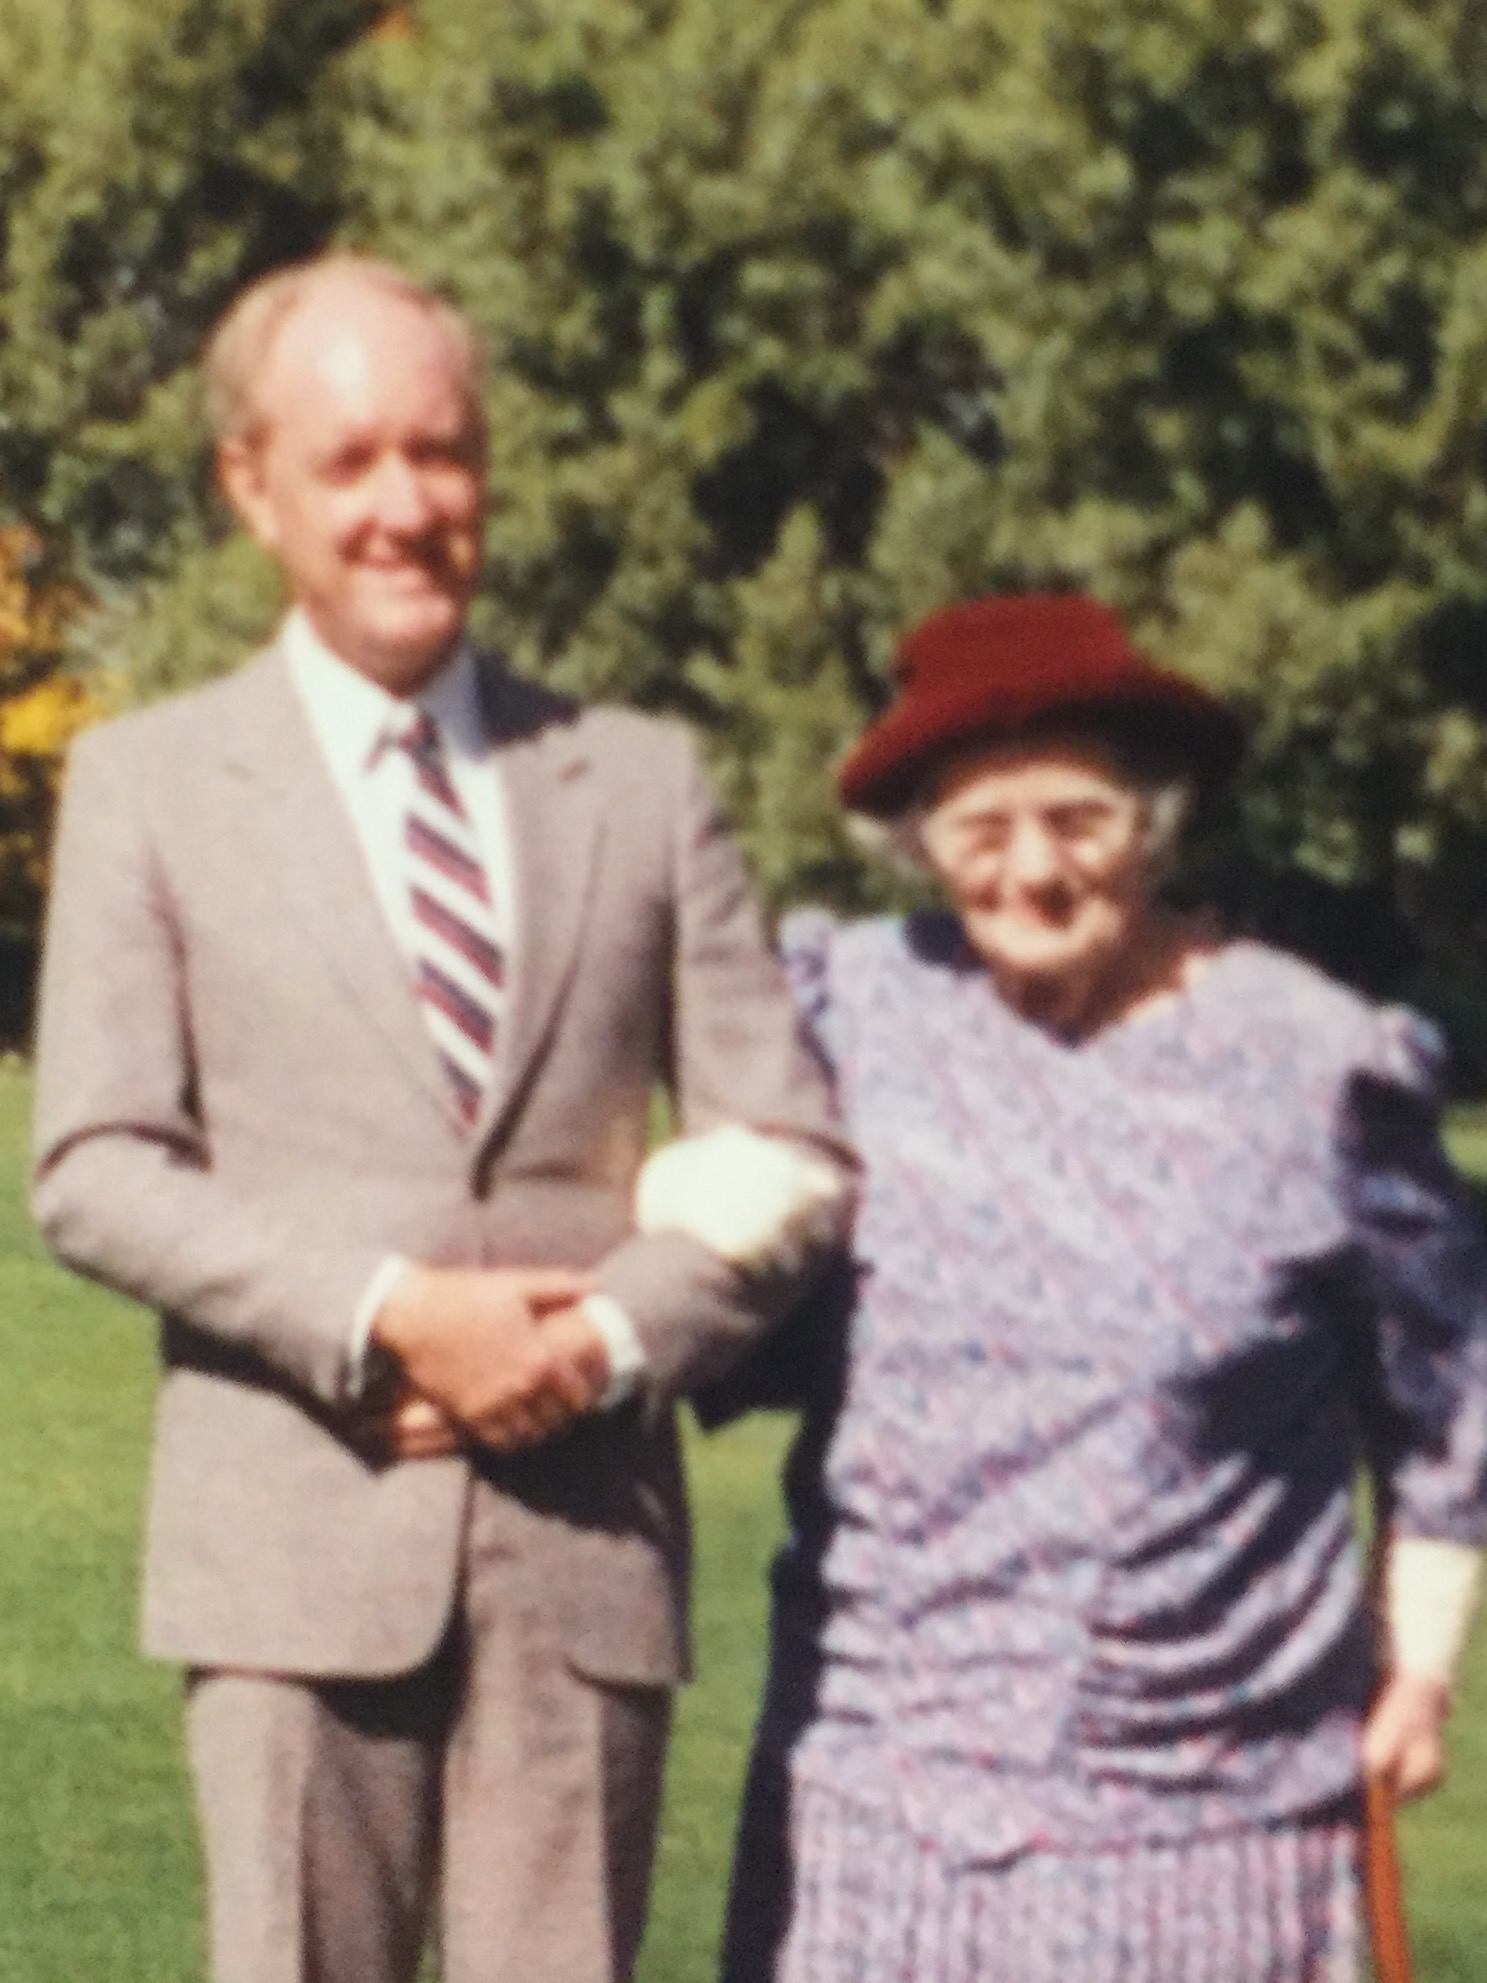 John P McD Smith with his mother Isabel at Government House in Adelaide to receive her award from Queen Elizabeth II in the 1992 Australia Day Honours